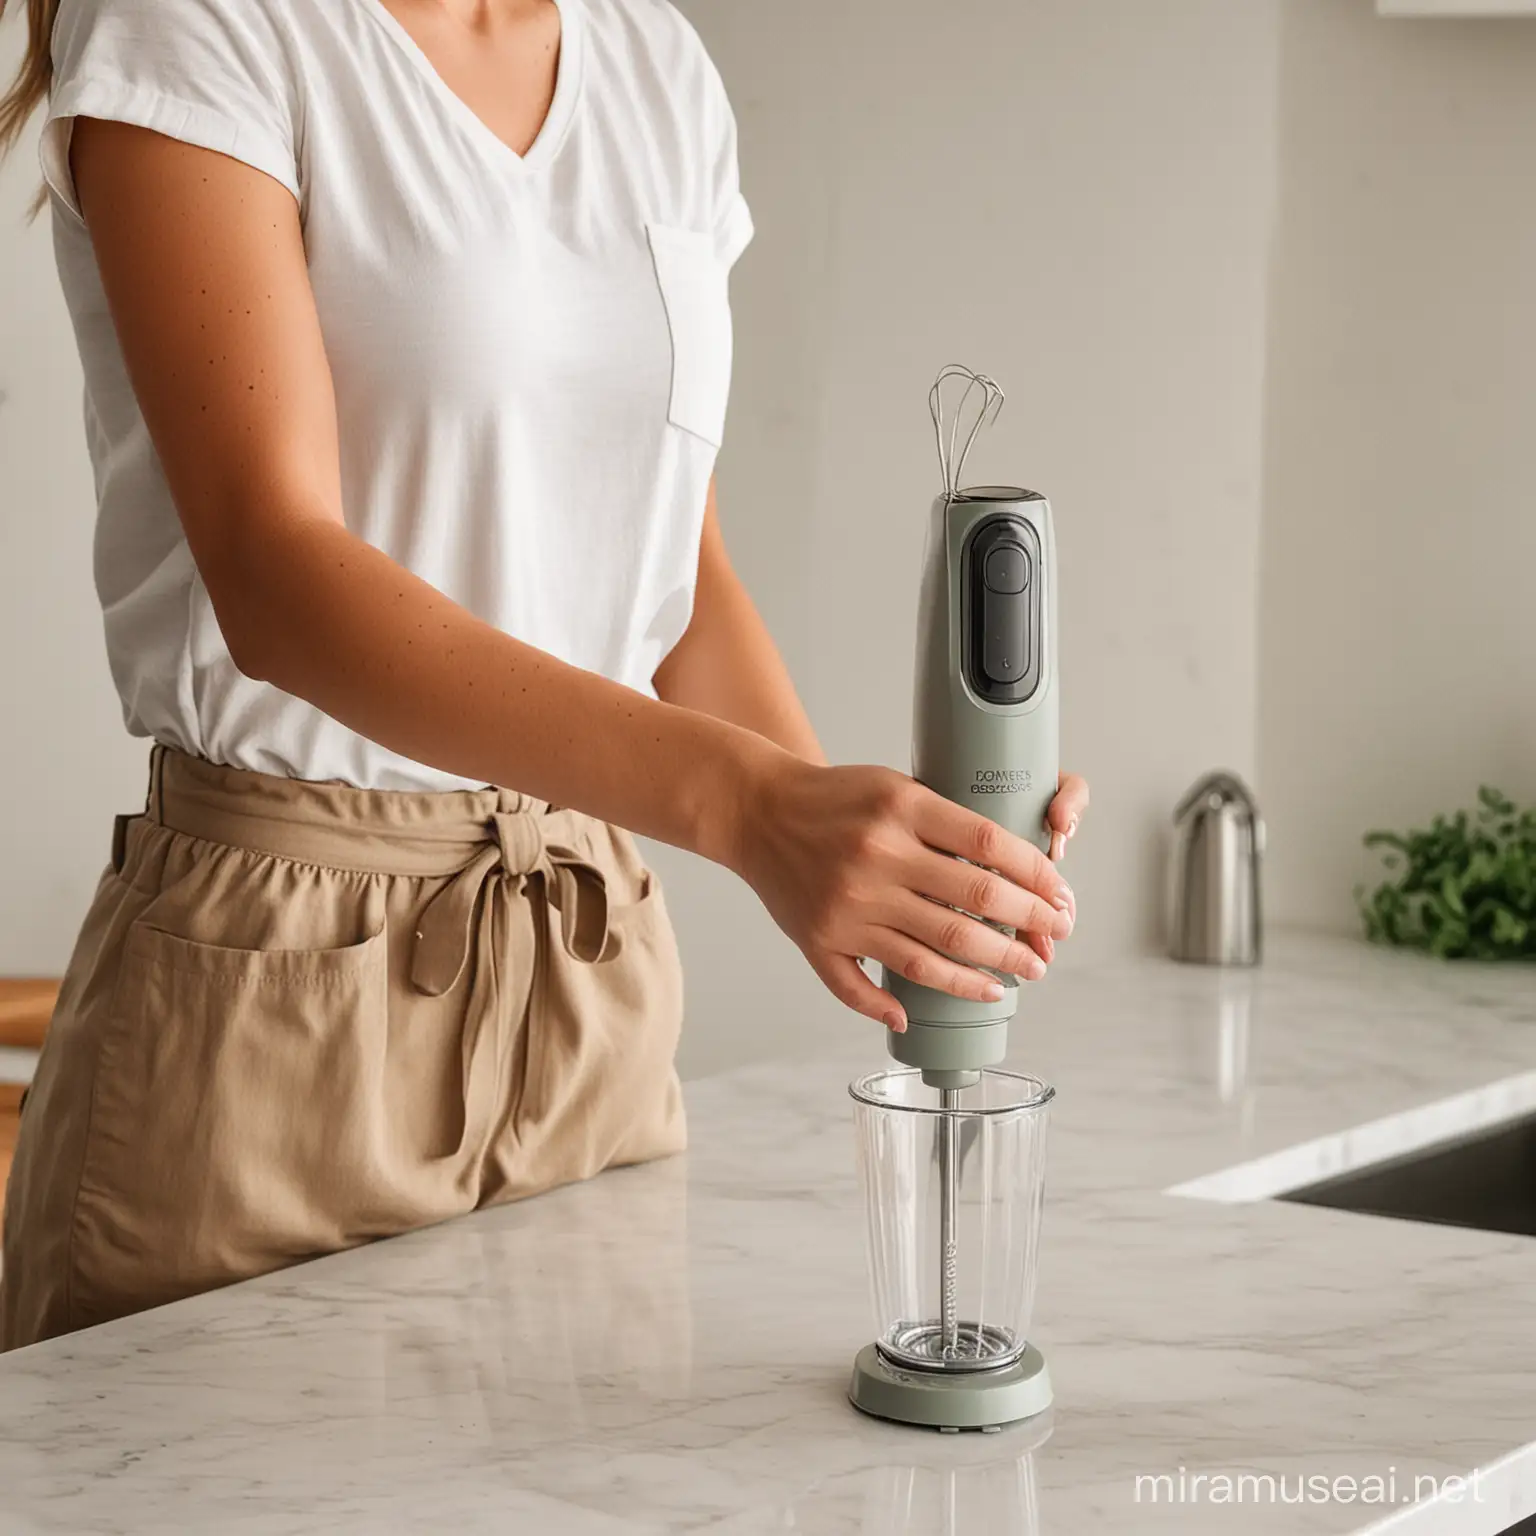 a women hand hold a stick blender on the counter

